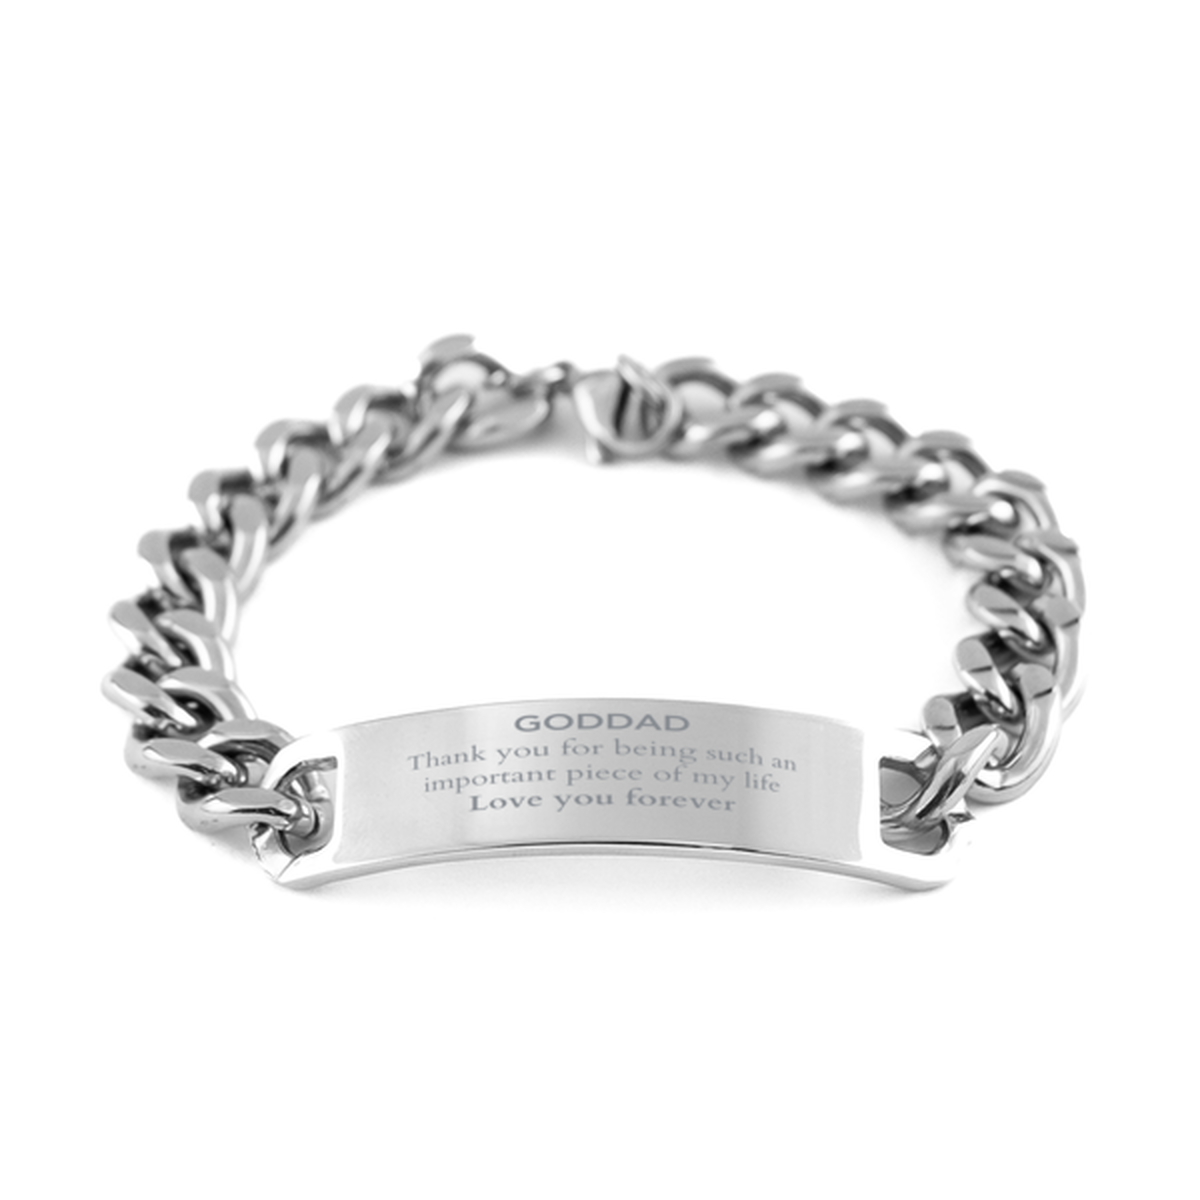 Appropriate Goddad Cuban Chain Stainless Steel Bracelet Epic Birthday Gifts for Goddad Thank you for being such an important piece of my life Goddad Christmas Mothers Fathers Day